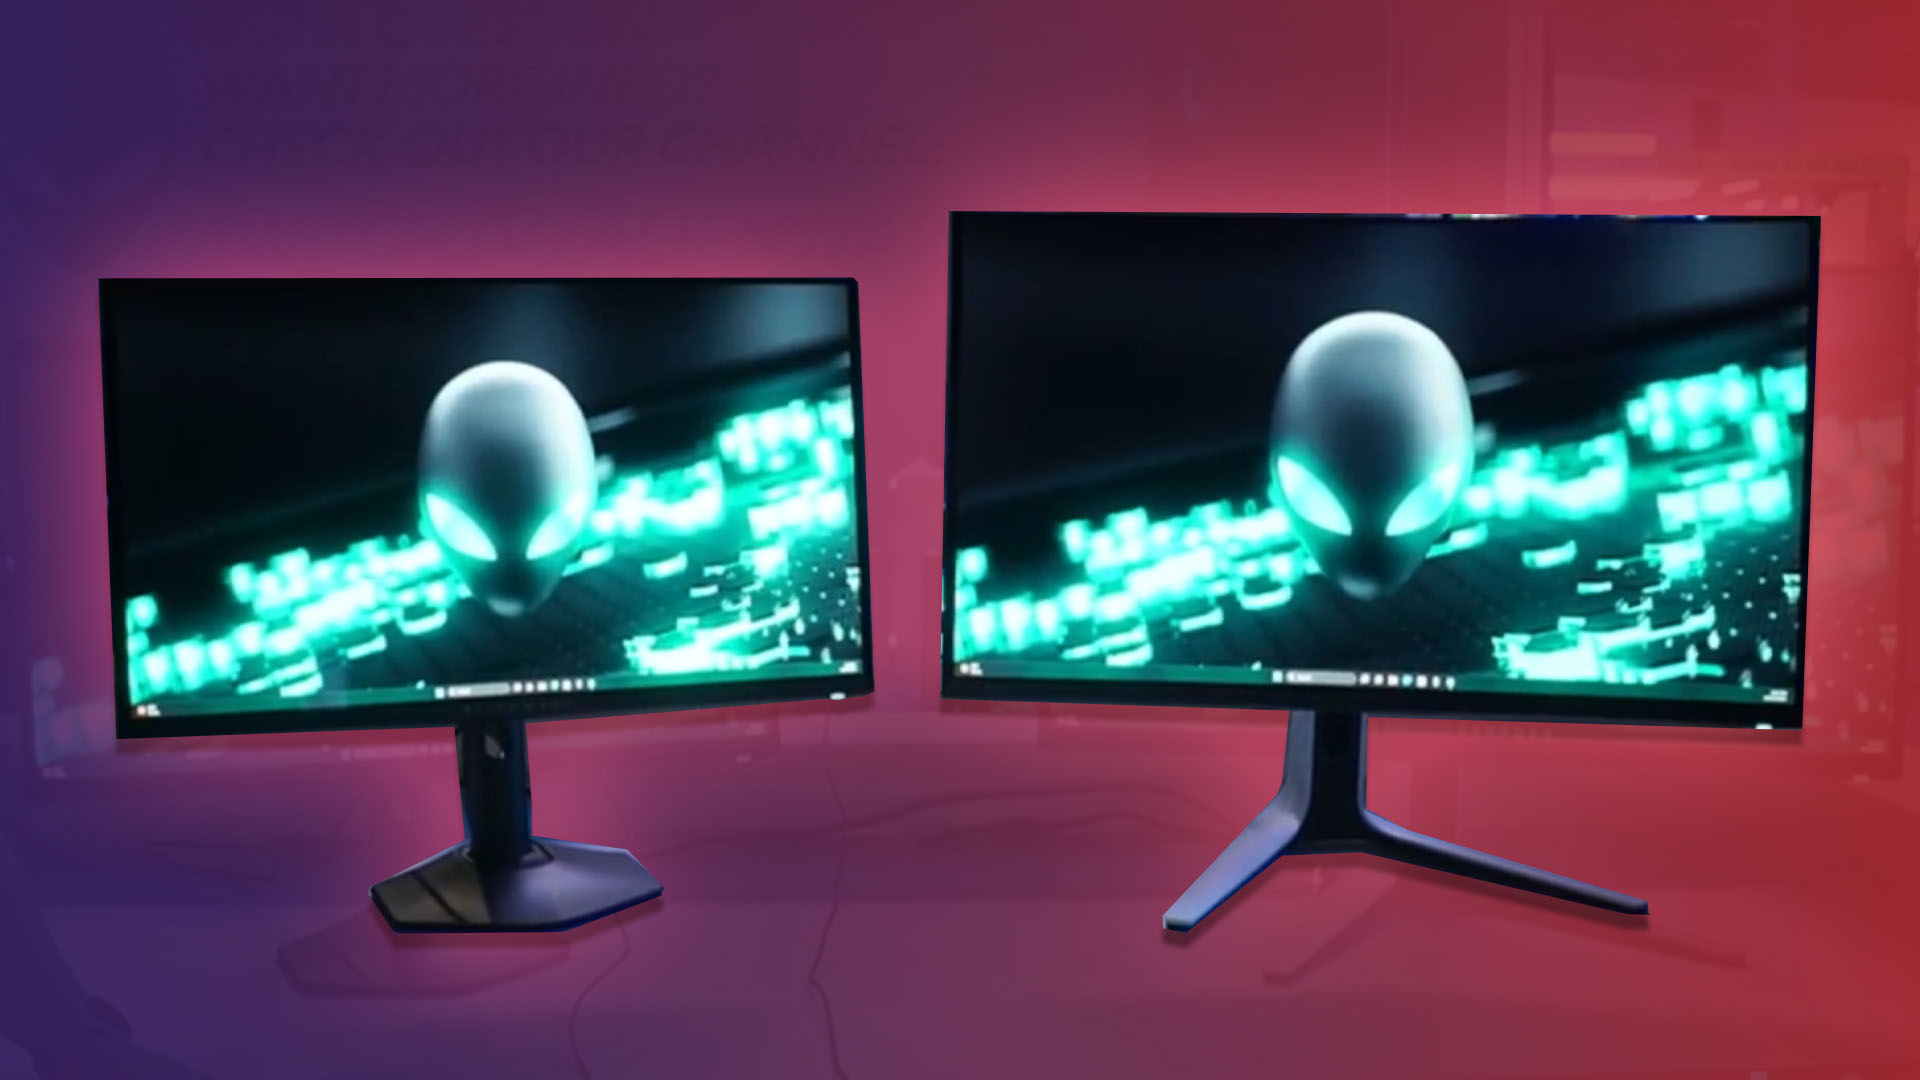 Dell's Alienware launches 55 OLED gaming monitor without HDR, HDMI 2.1 -  FlatpanelsHD